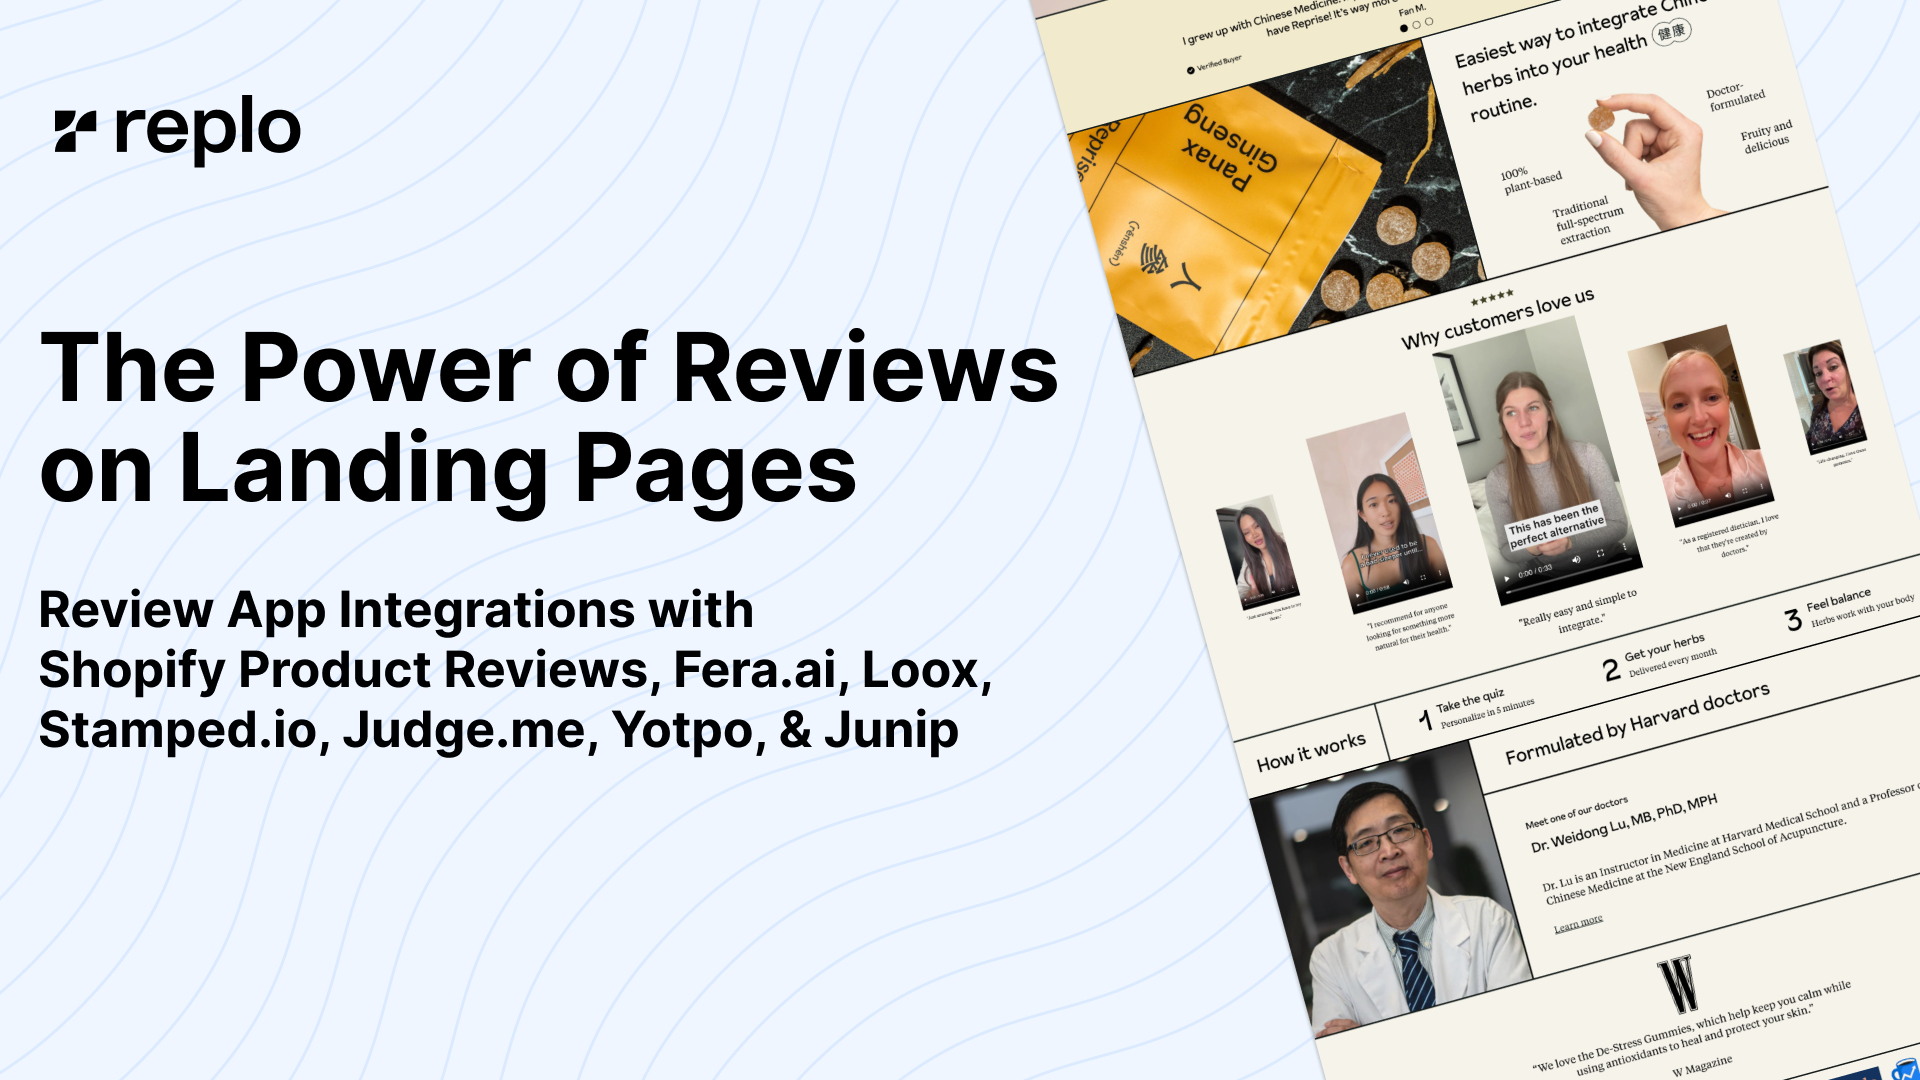 The Power of Reviews on Landing Pages